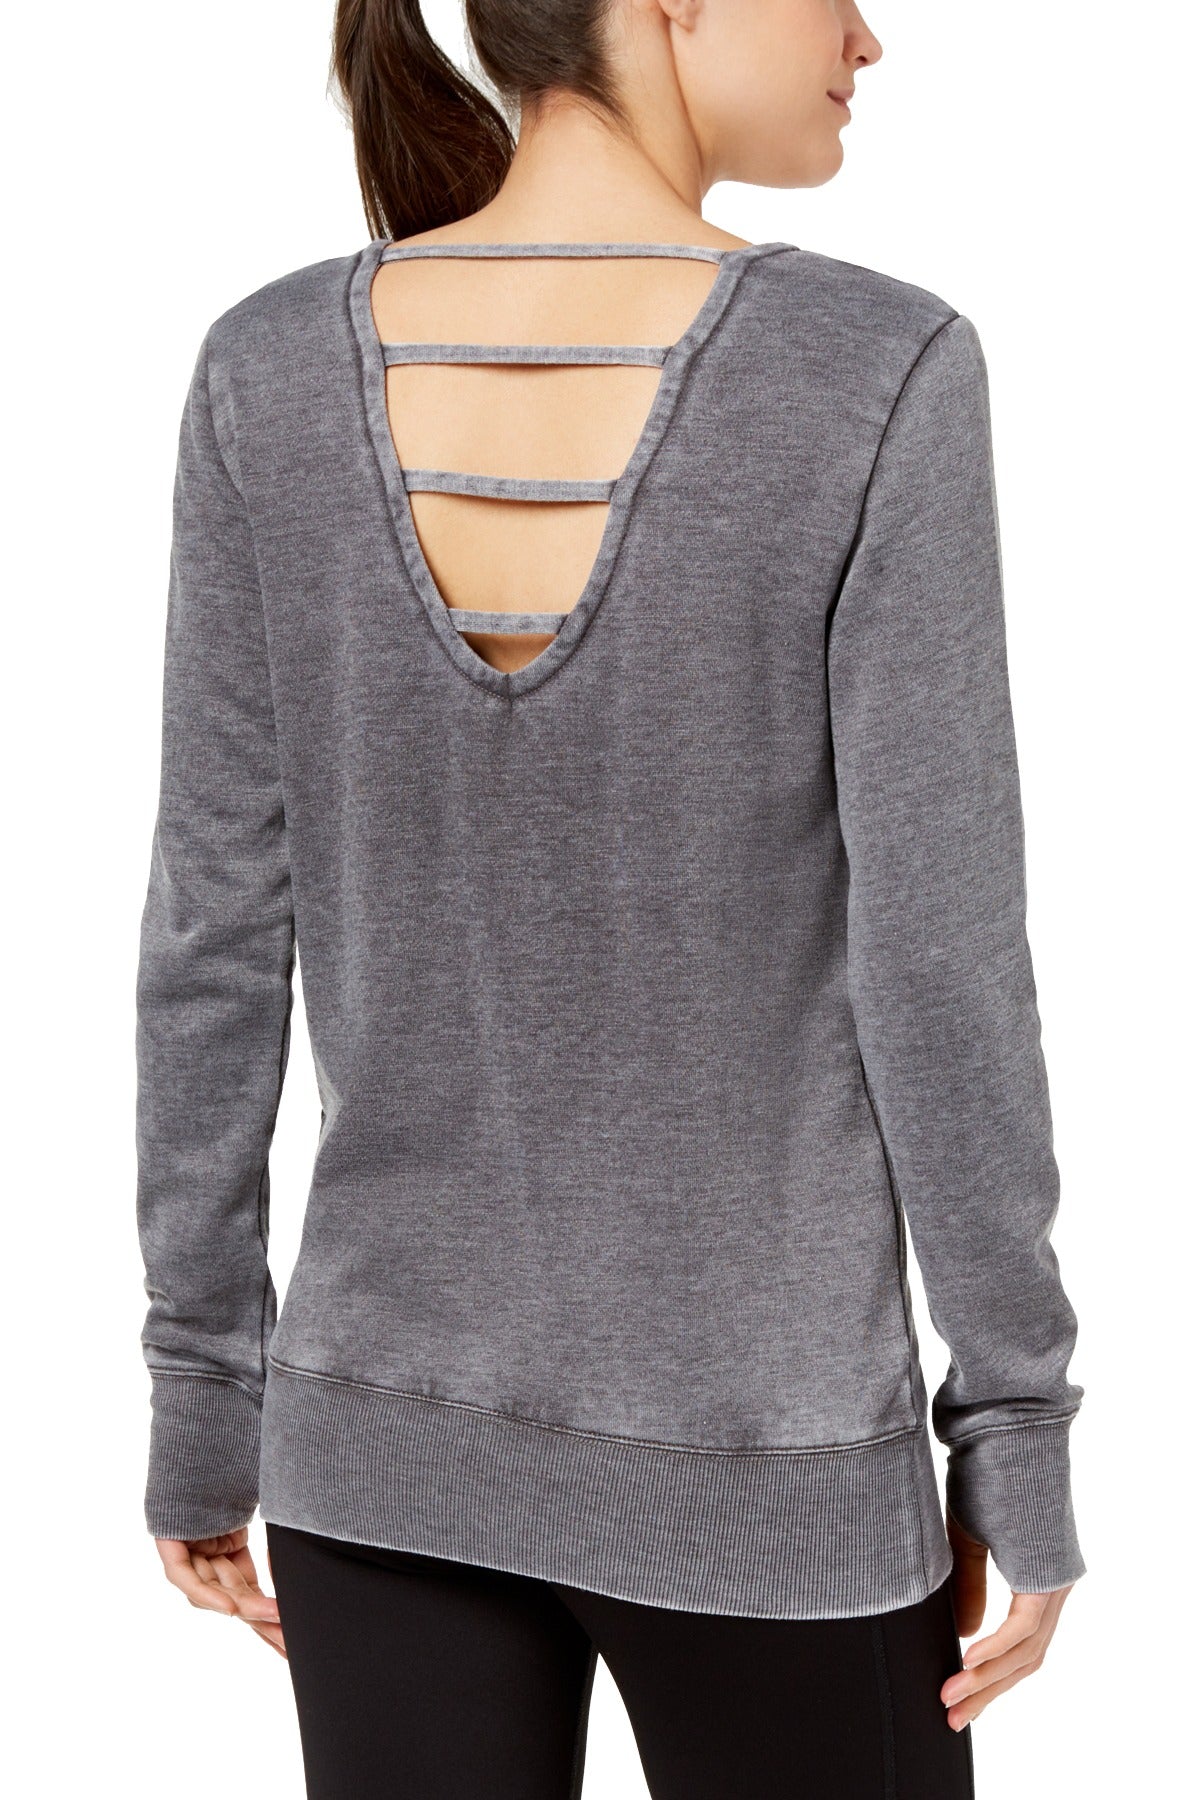 Ideology Deep-Charcoal Graphic Strappy-Back Sweatshirt